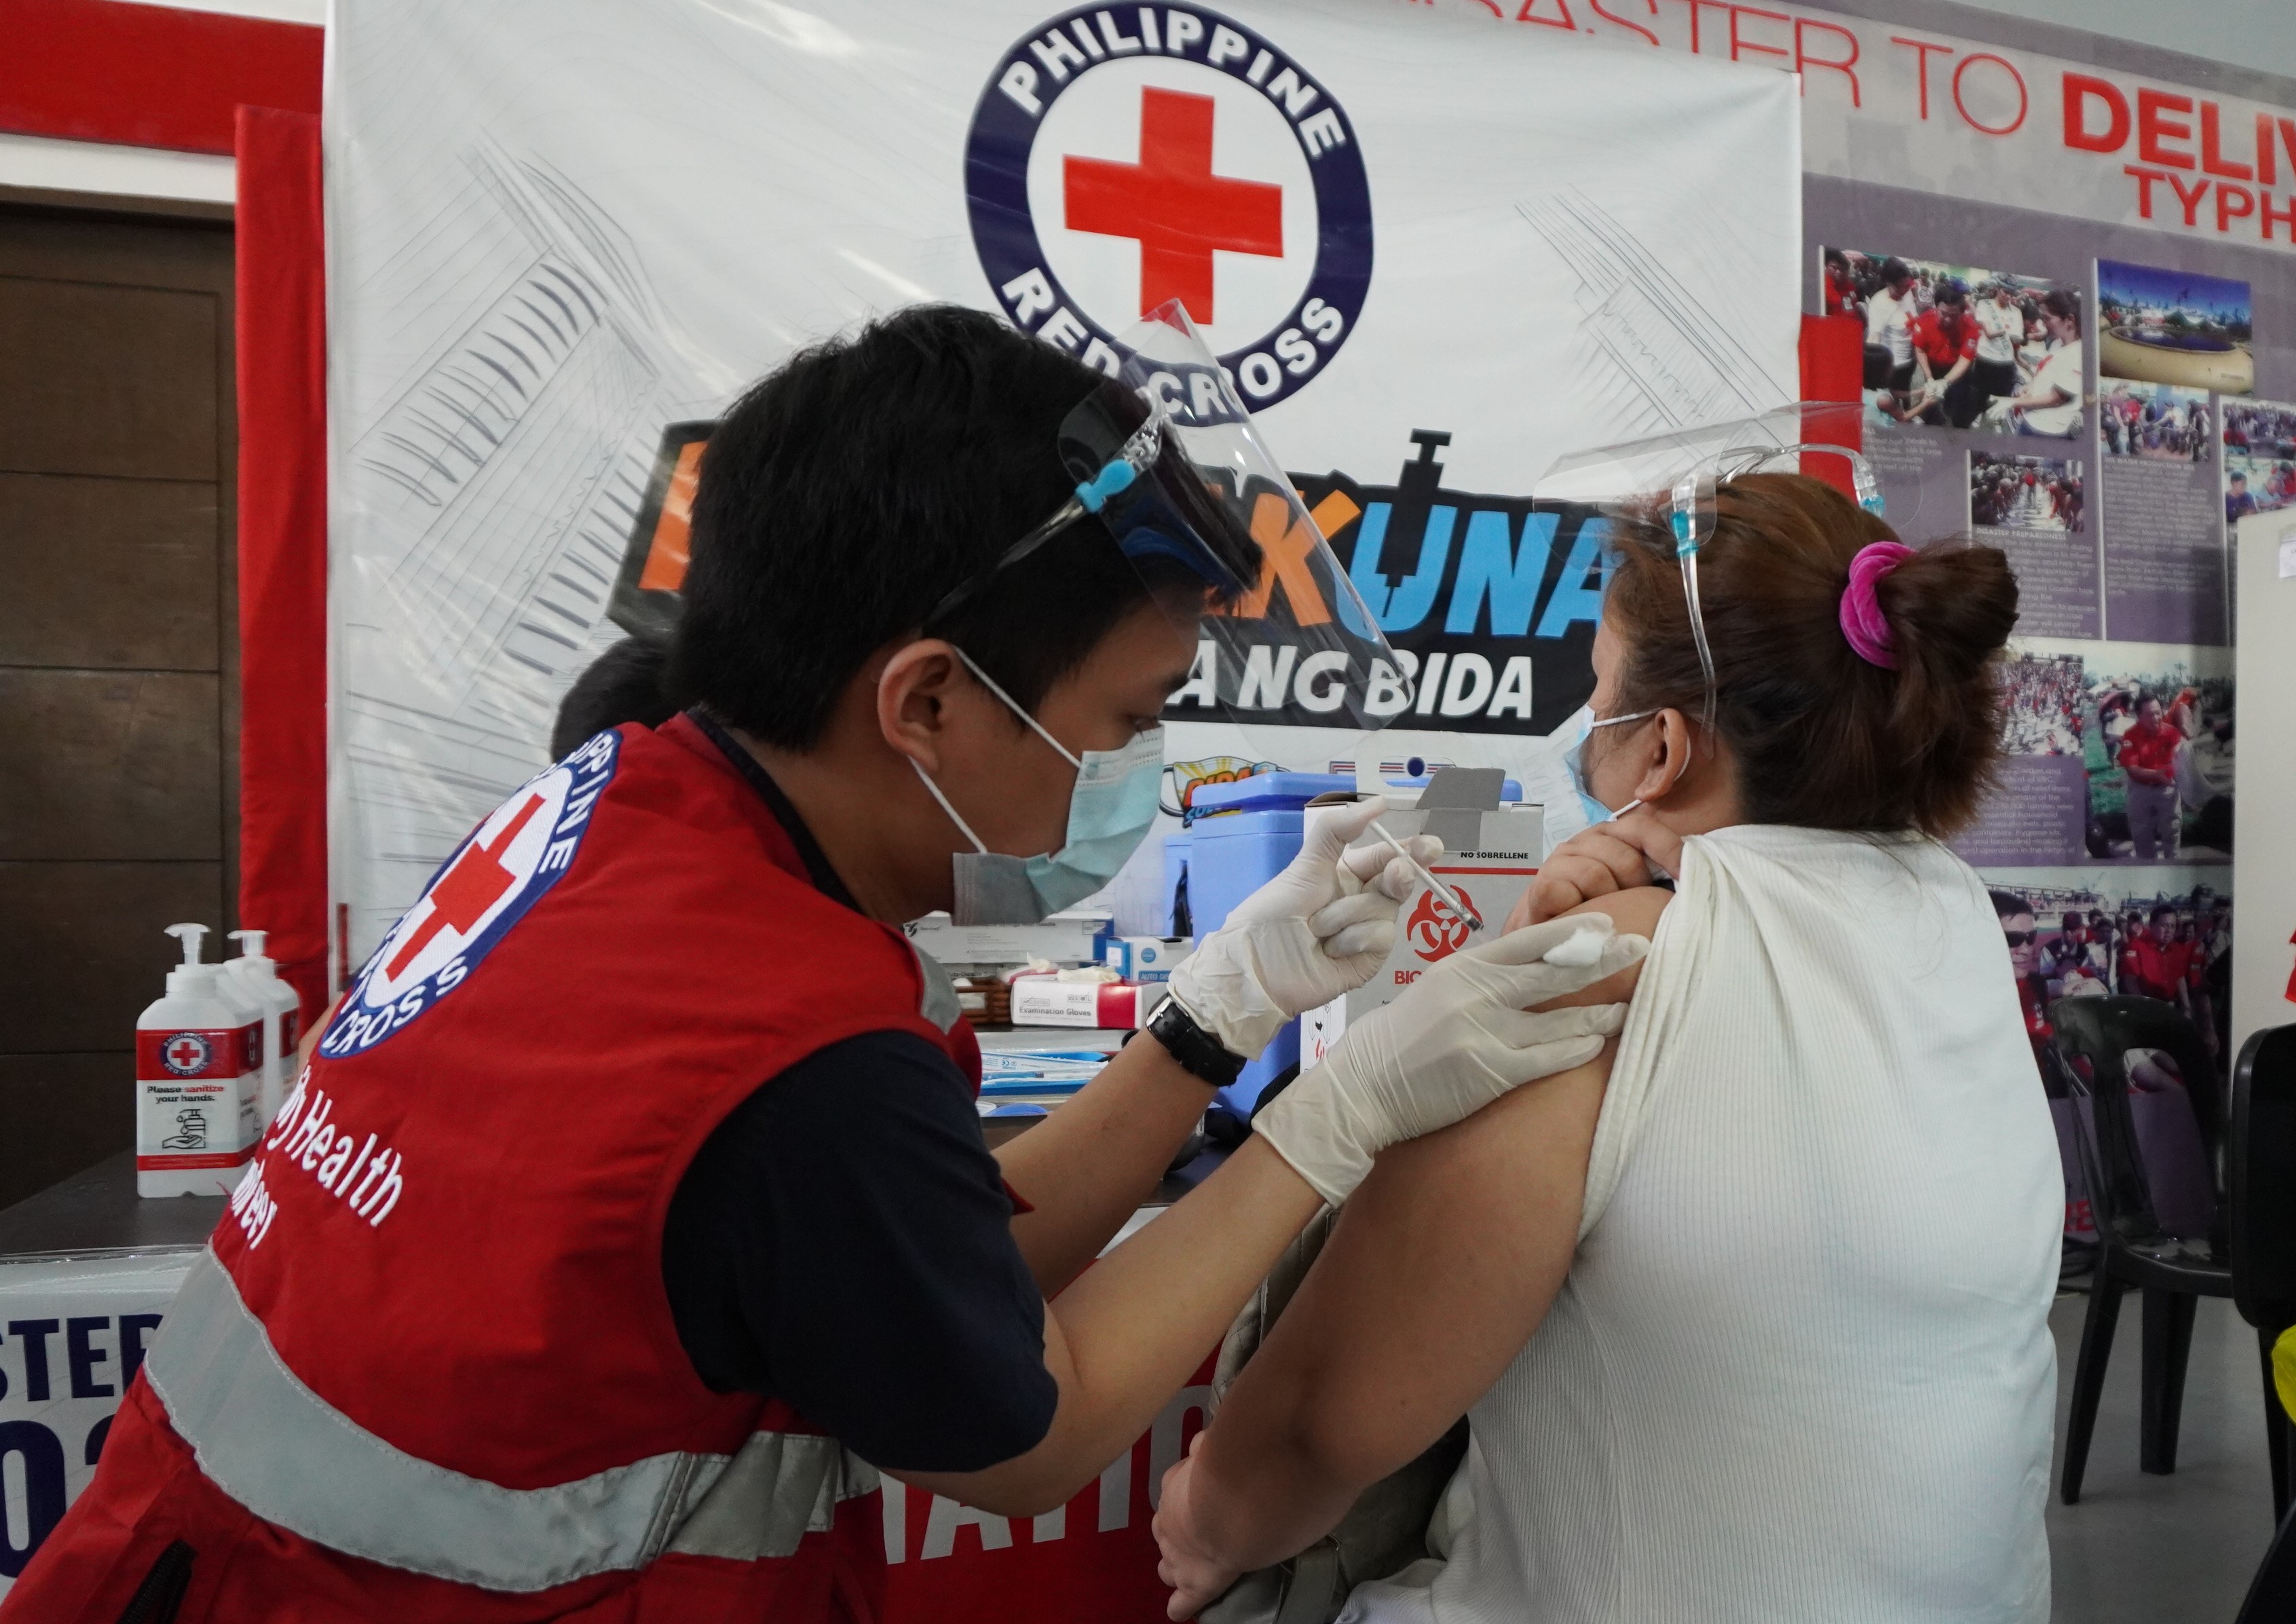 A man with a Philippine Red Cross vest giving a vaccine to a woman